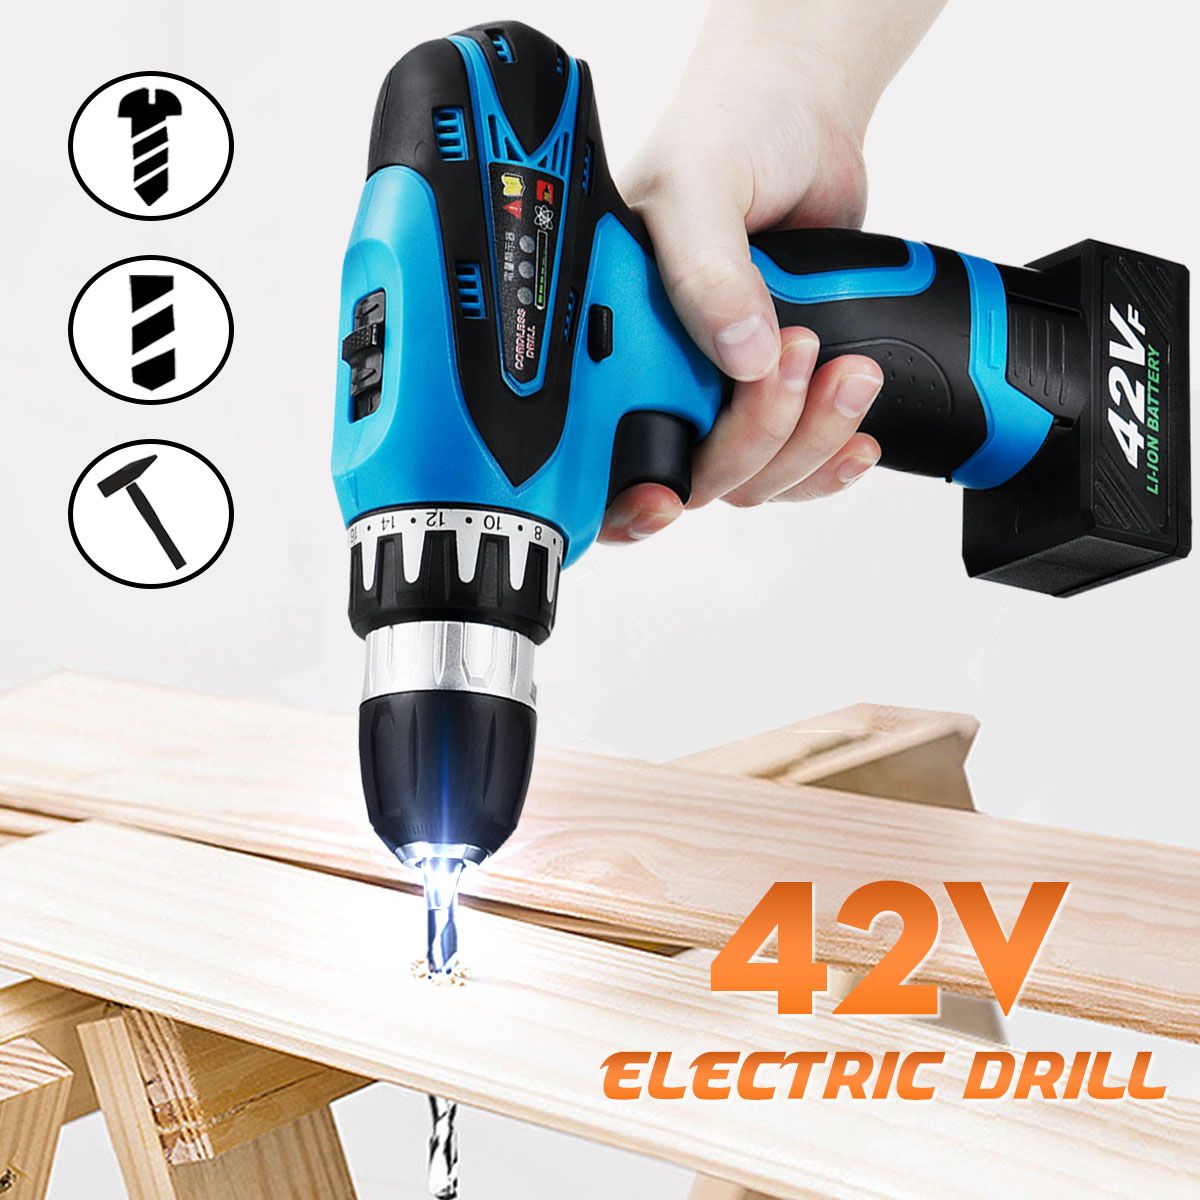 42V-9000mAh-Electric-Cordless-Drill-Driver-LED-2-Speed-Screwdriver-W-1-or-2-Li-Ion-Battery-1451594